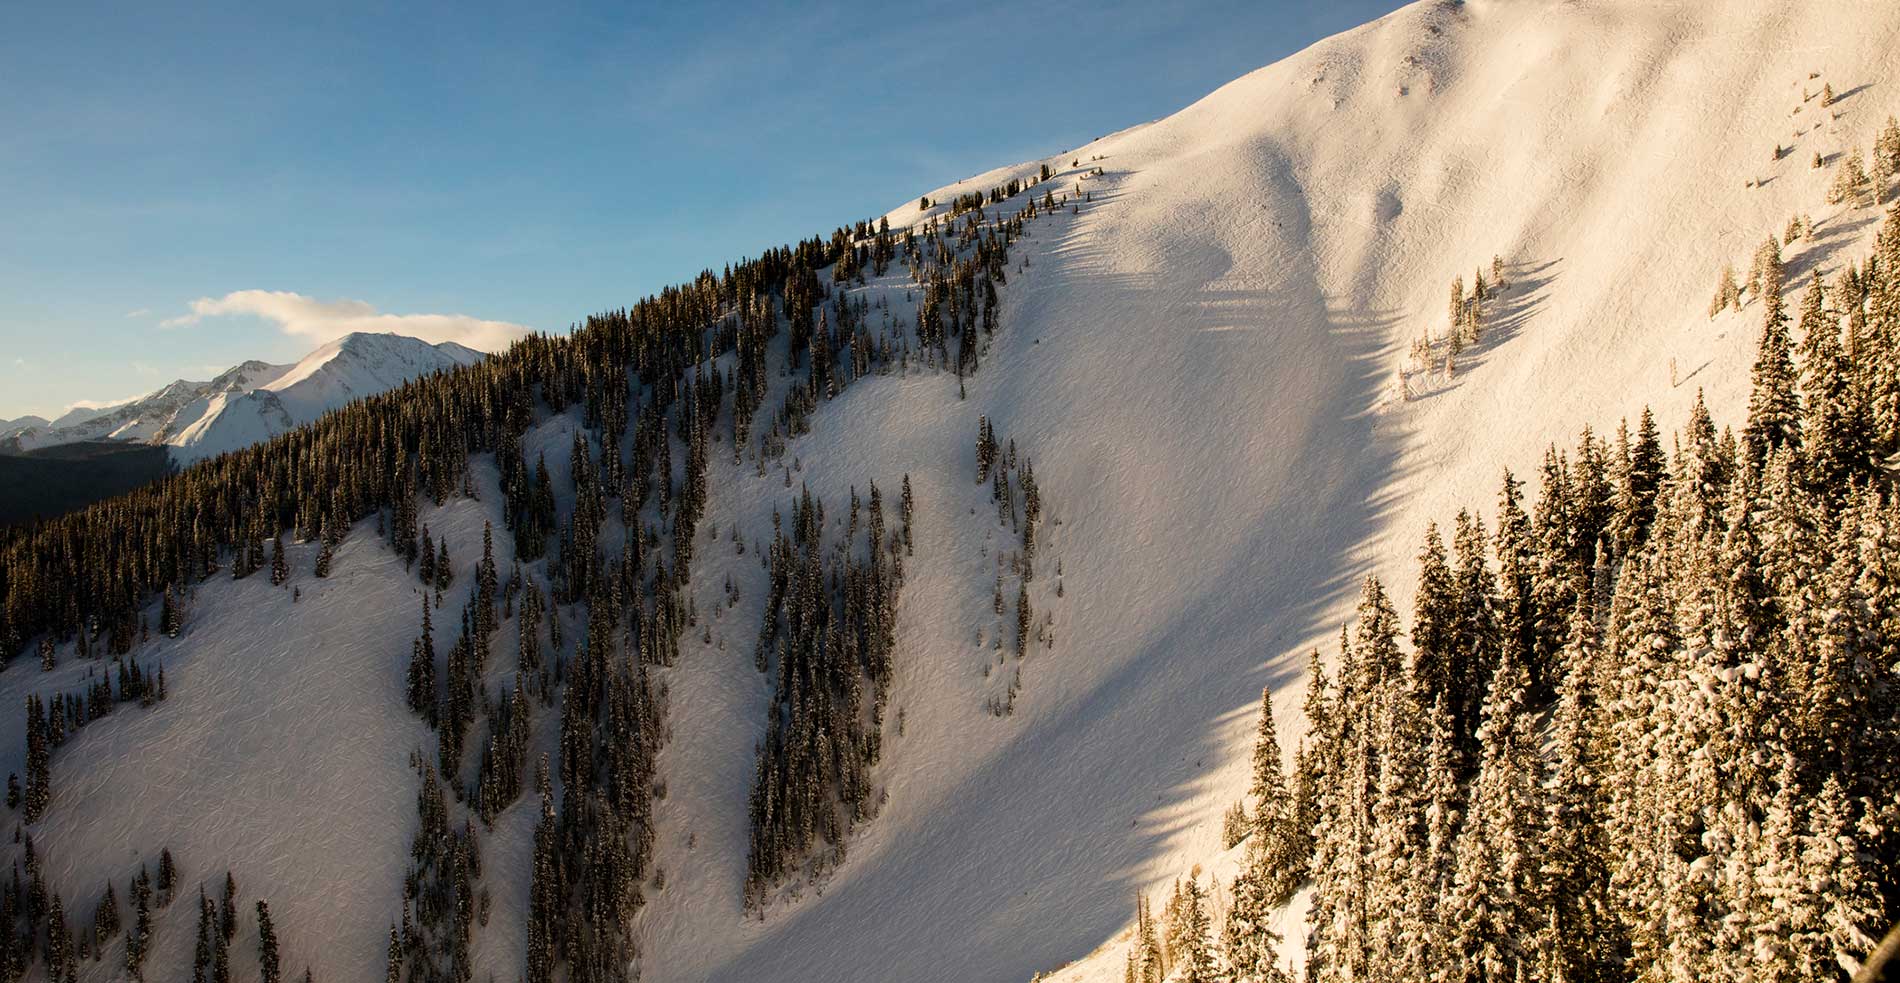 Early season in the Highland Bowl at Aspen Highlands